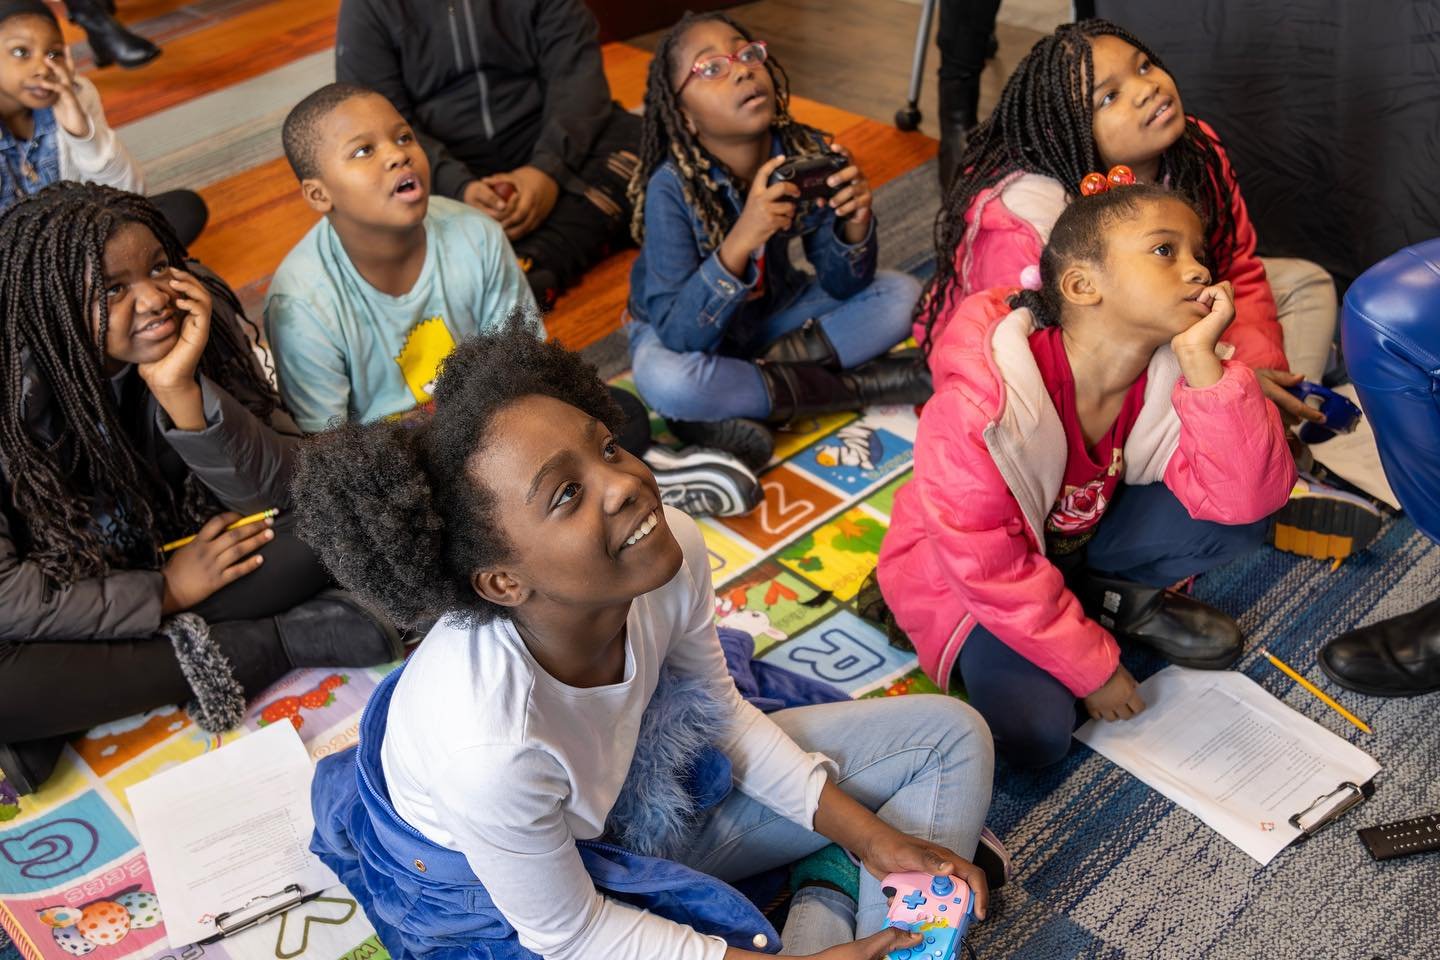 Video games, storytime and sign language! Oh my! We had a time this past weekend! Our first @blackchildrensbookweek Literacy Festival went so well and we can&rsquo;t wait to keep offering fun events for our youth and community. Look at these smiles!